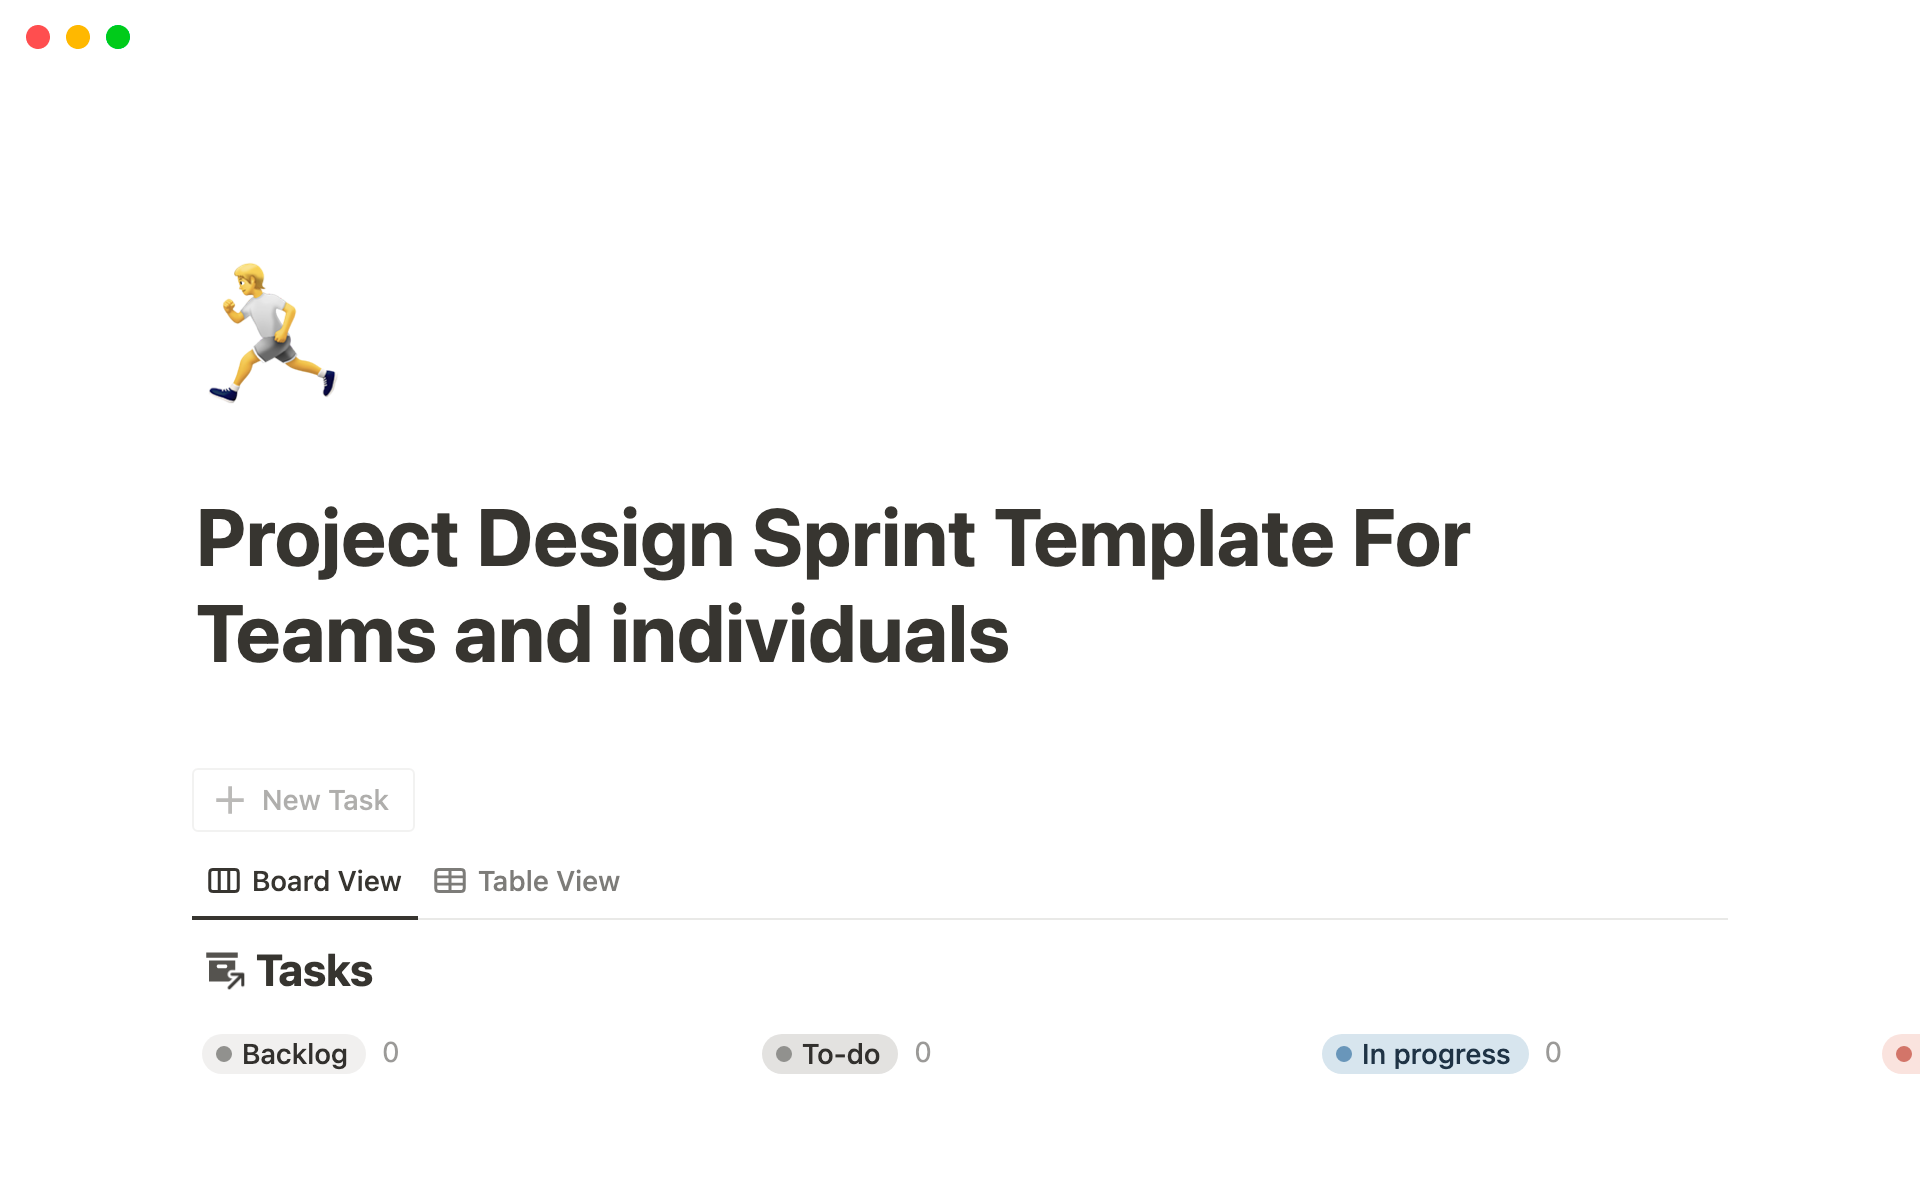 A template preview for Project Management: Design Sprints